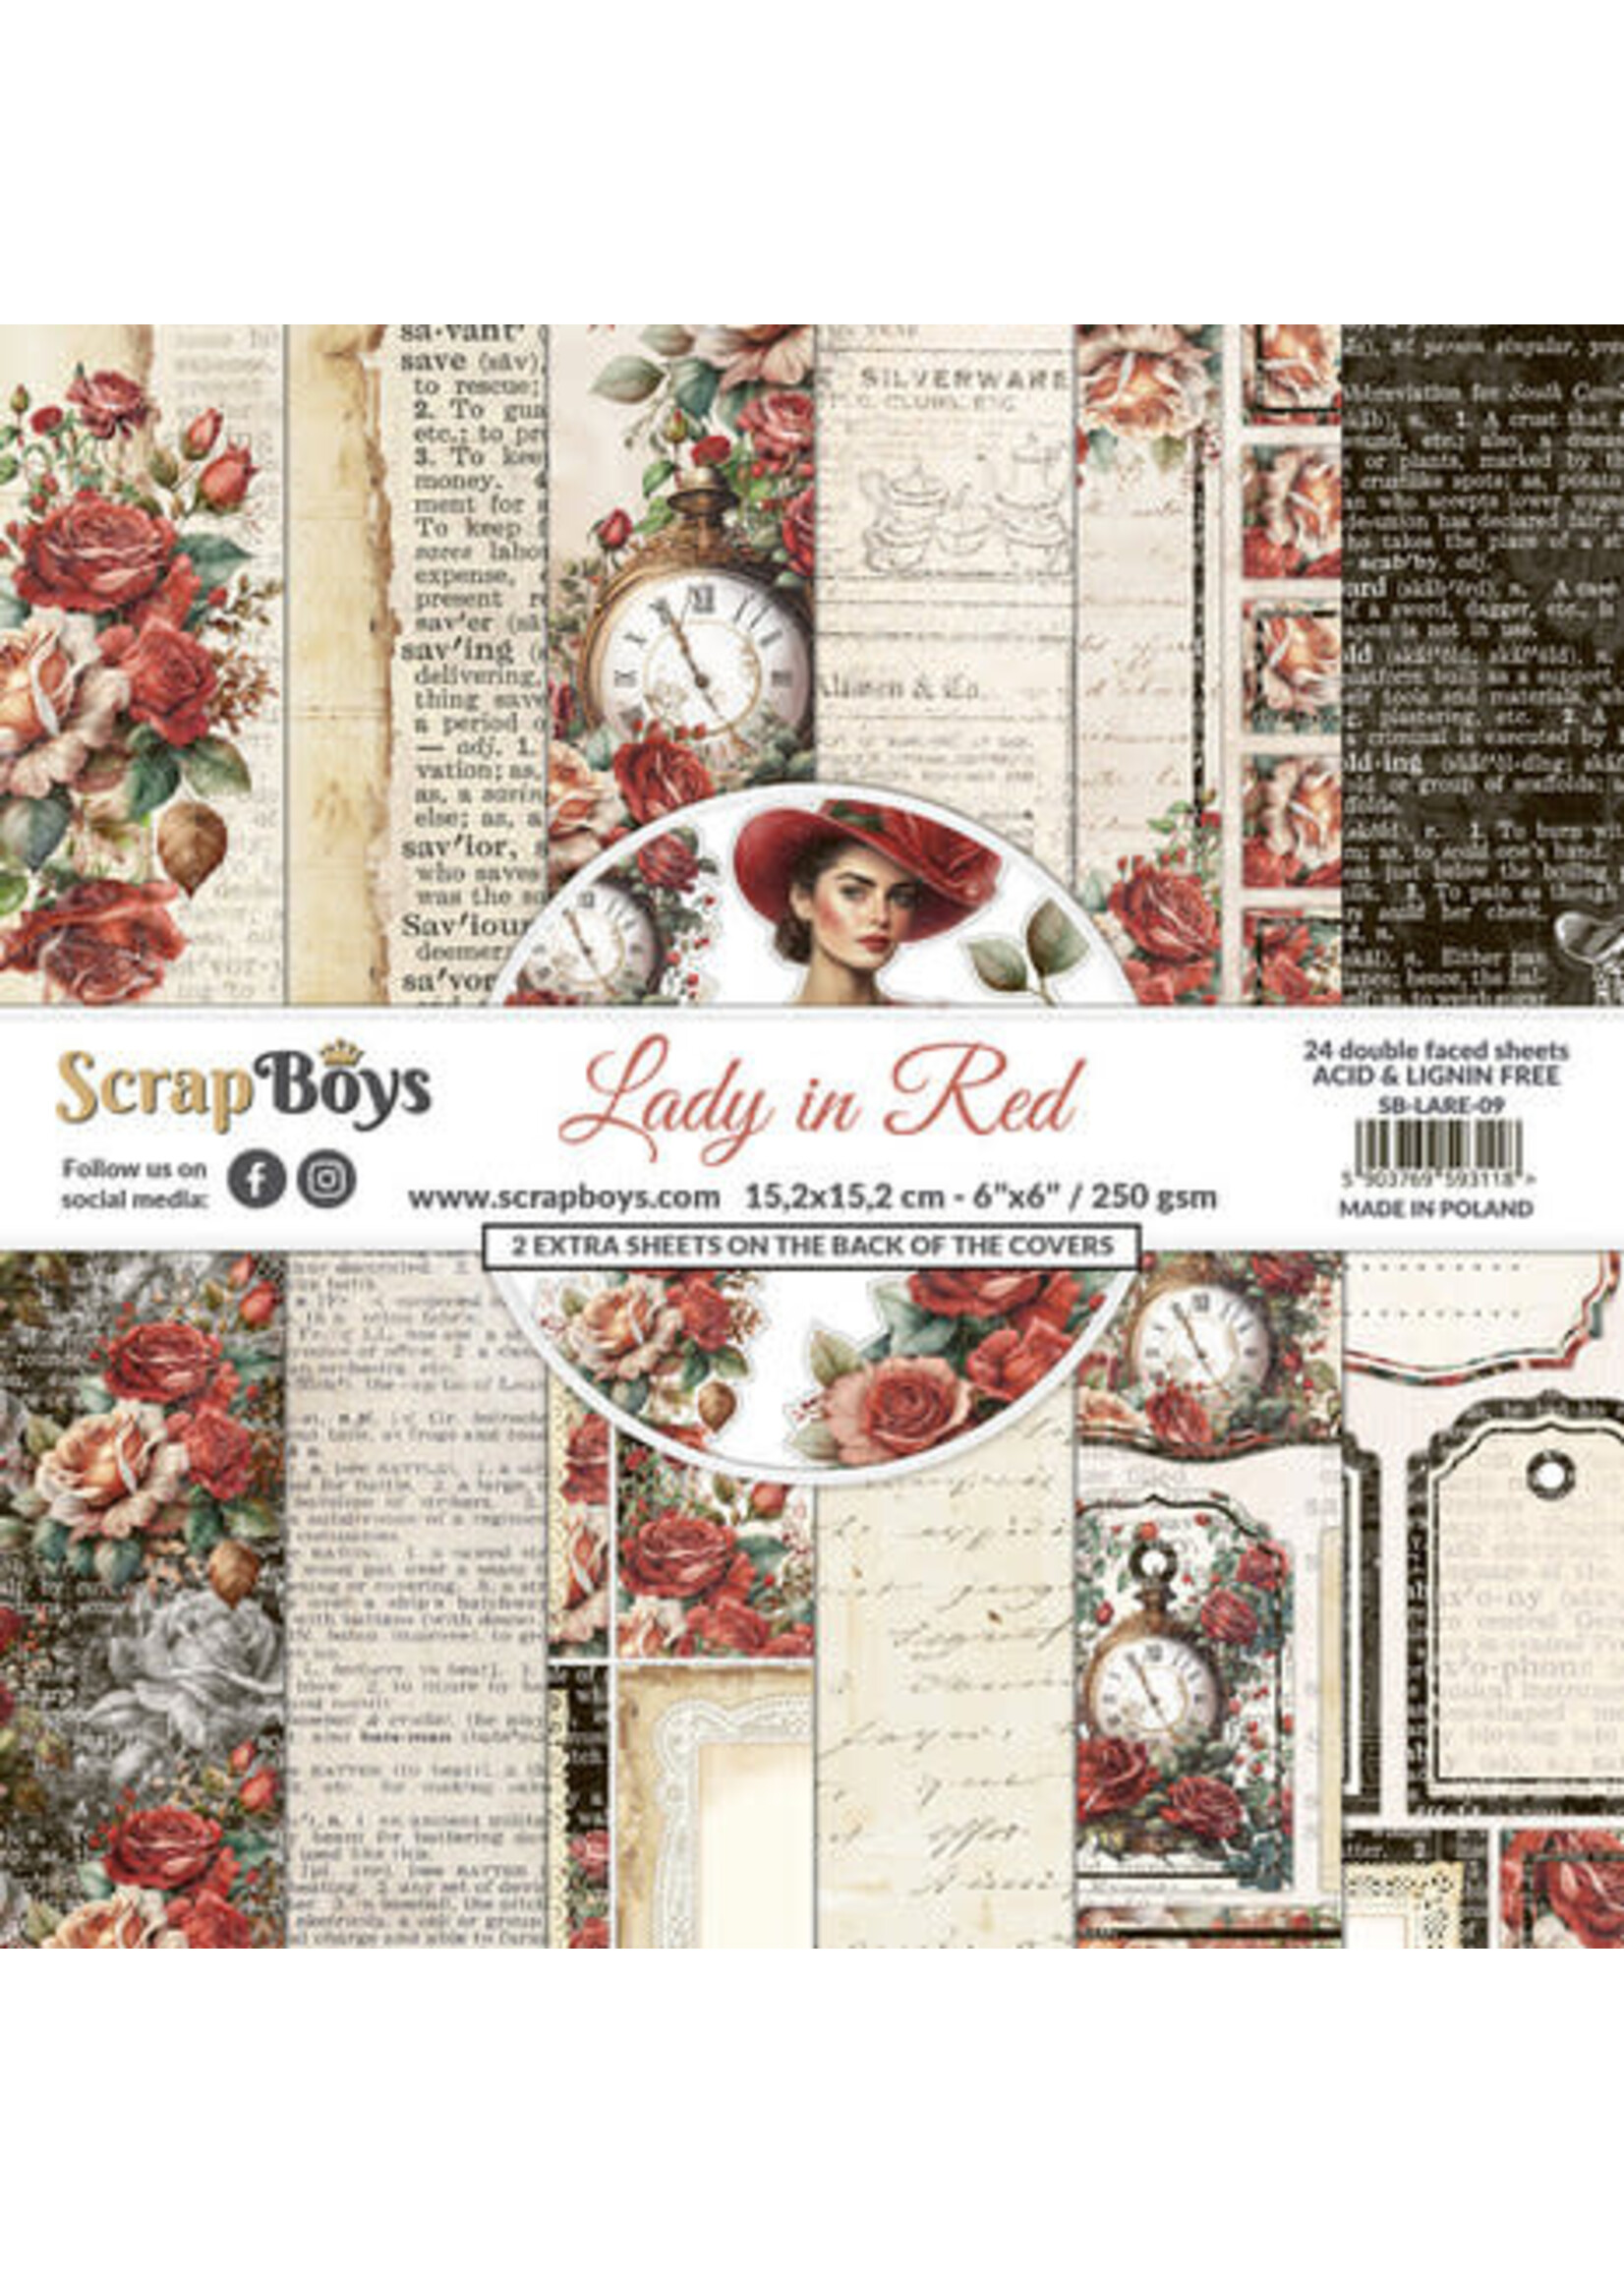 Scrapboys Lady in Red 6x6 Inch Paper Pad (SB-LARE-09)